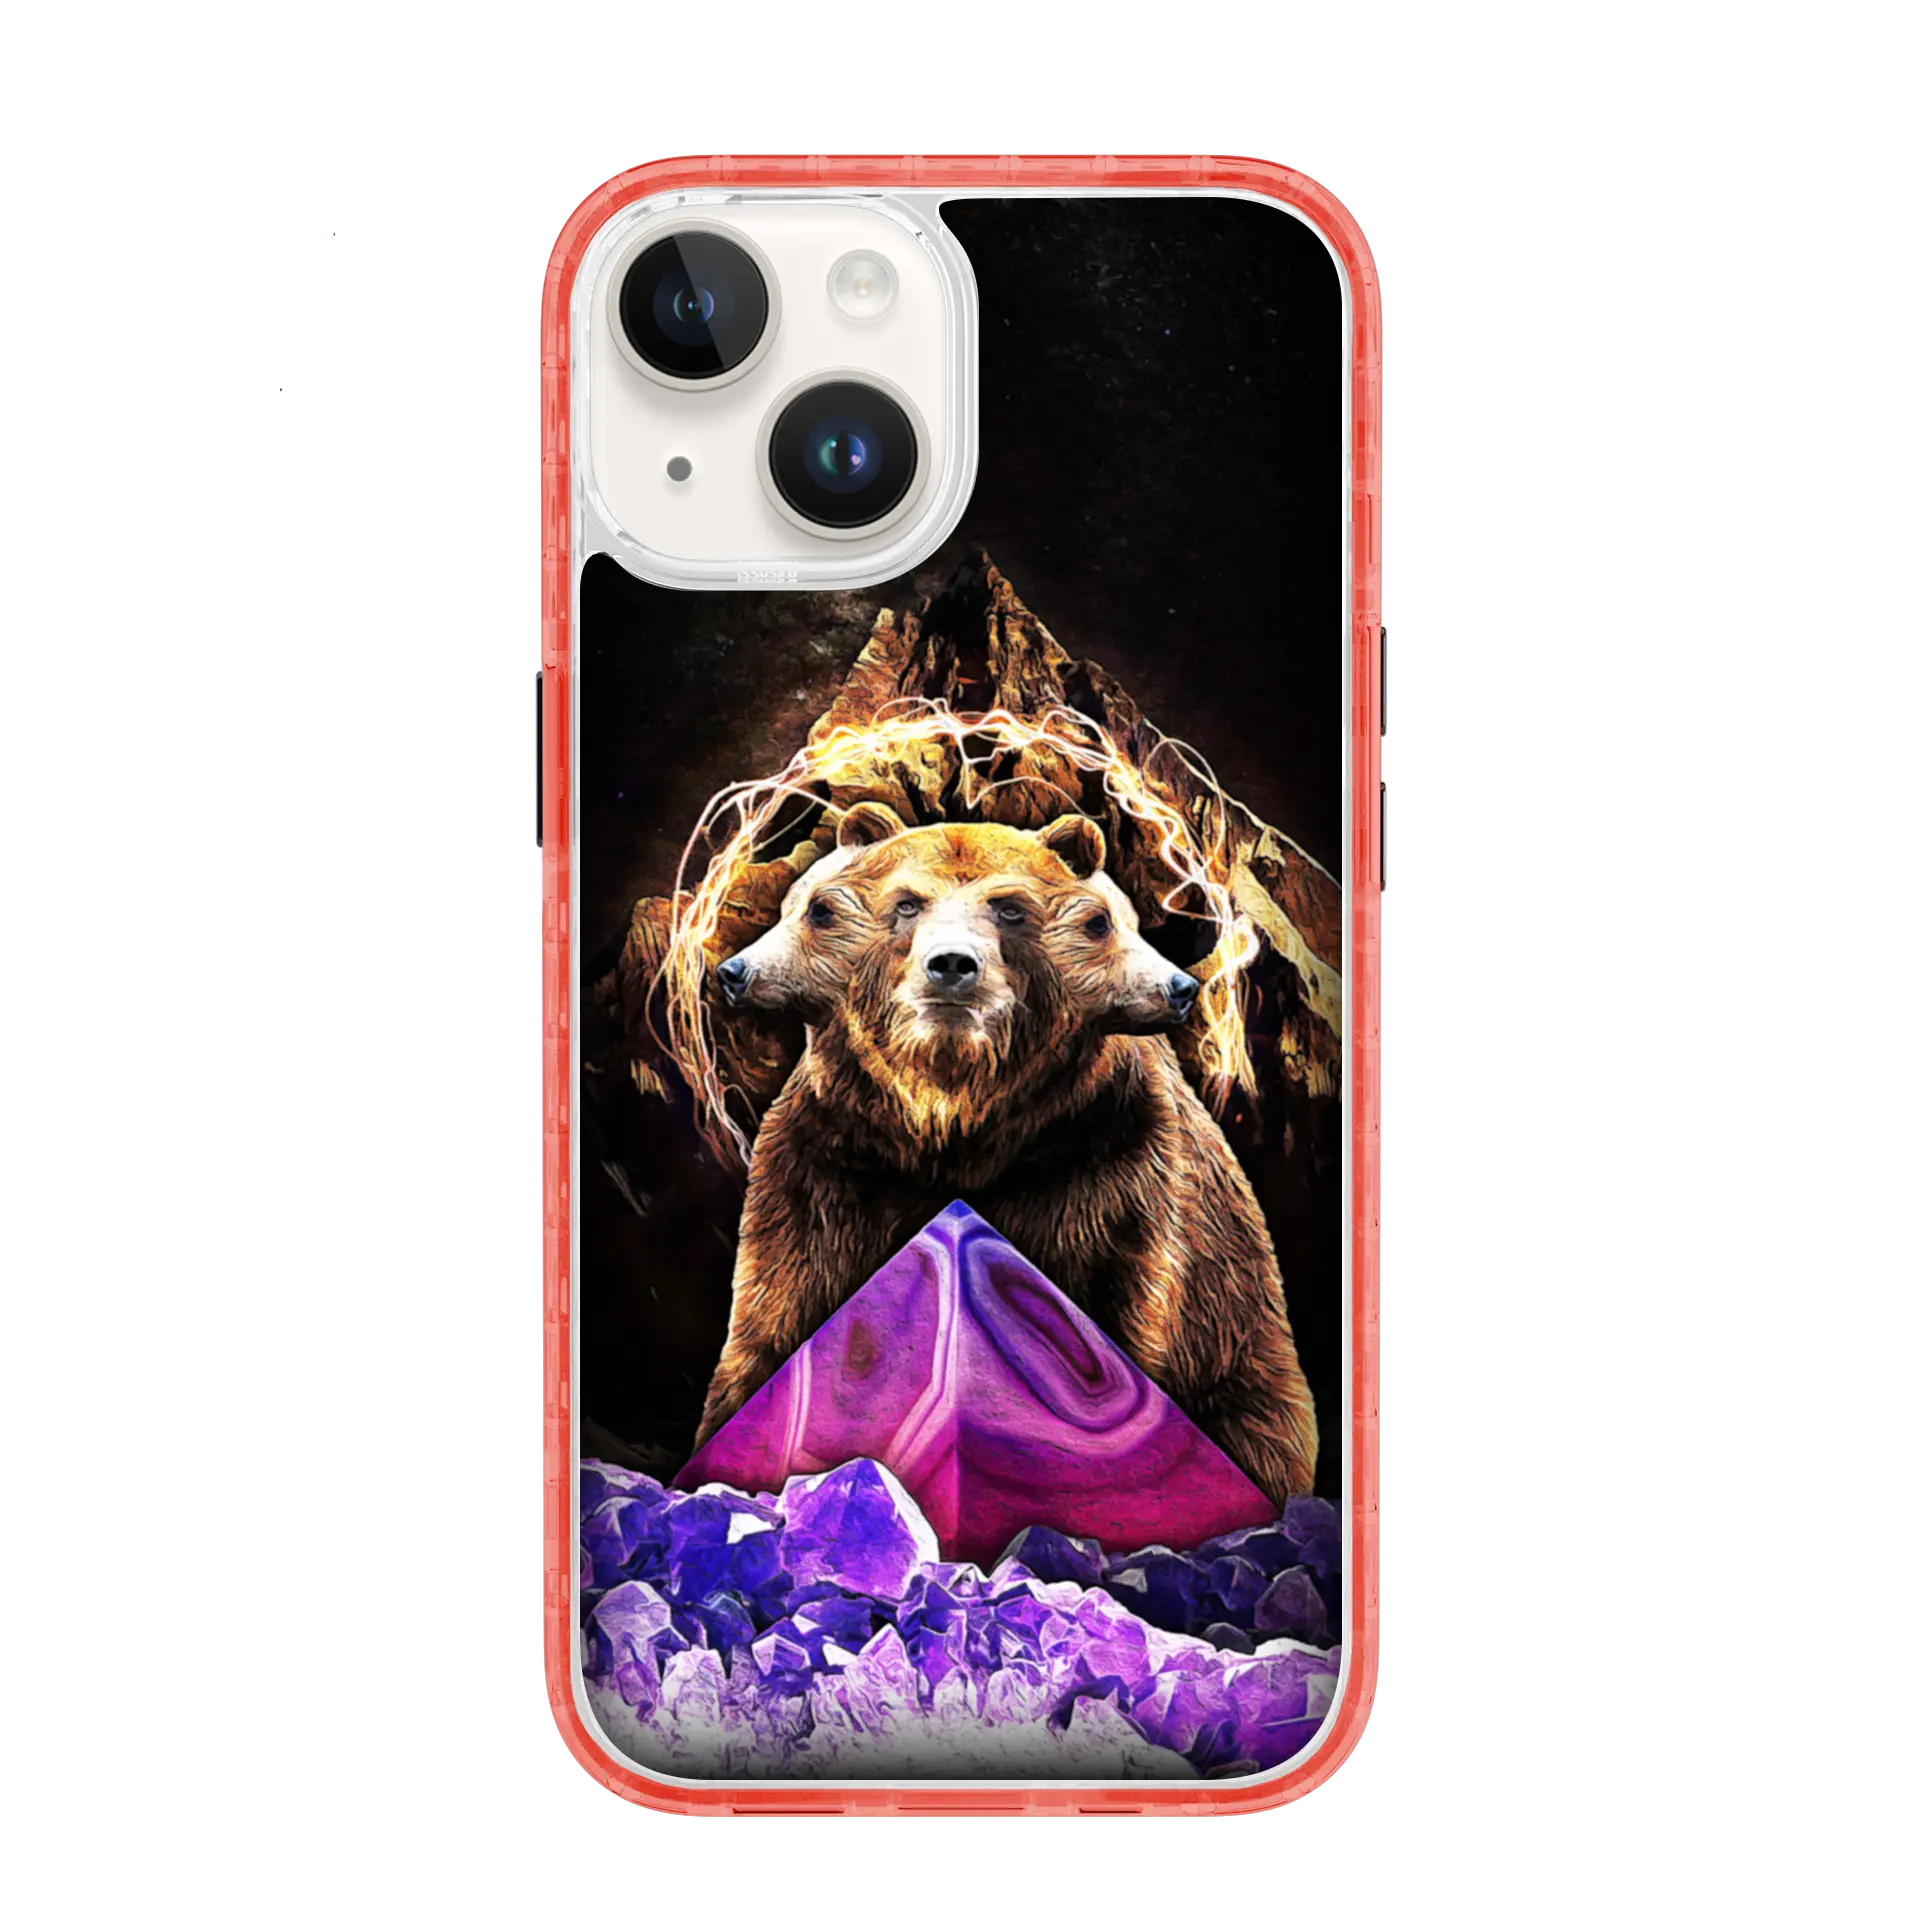 AppleiPhone14TurboRed Grizzly Widsom | Wizards & Wyrms Series | Custom MagSafe Case Design for Apple iPhone 14 Series cellhelmet cellhelmet